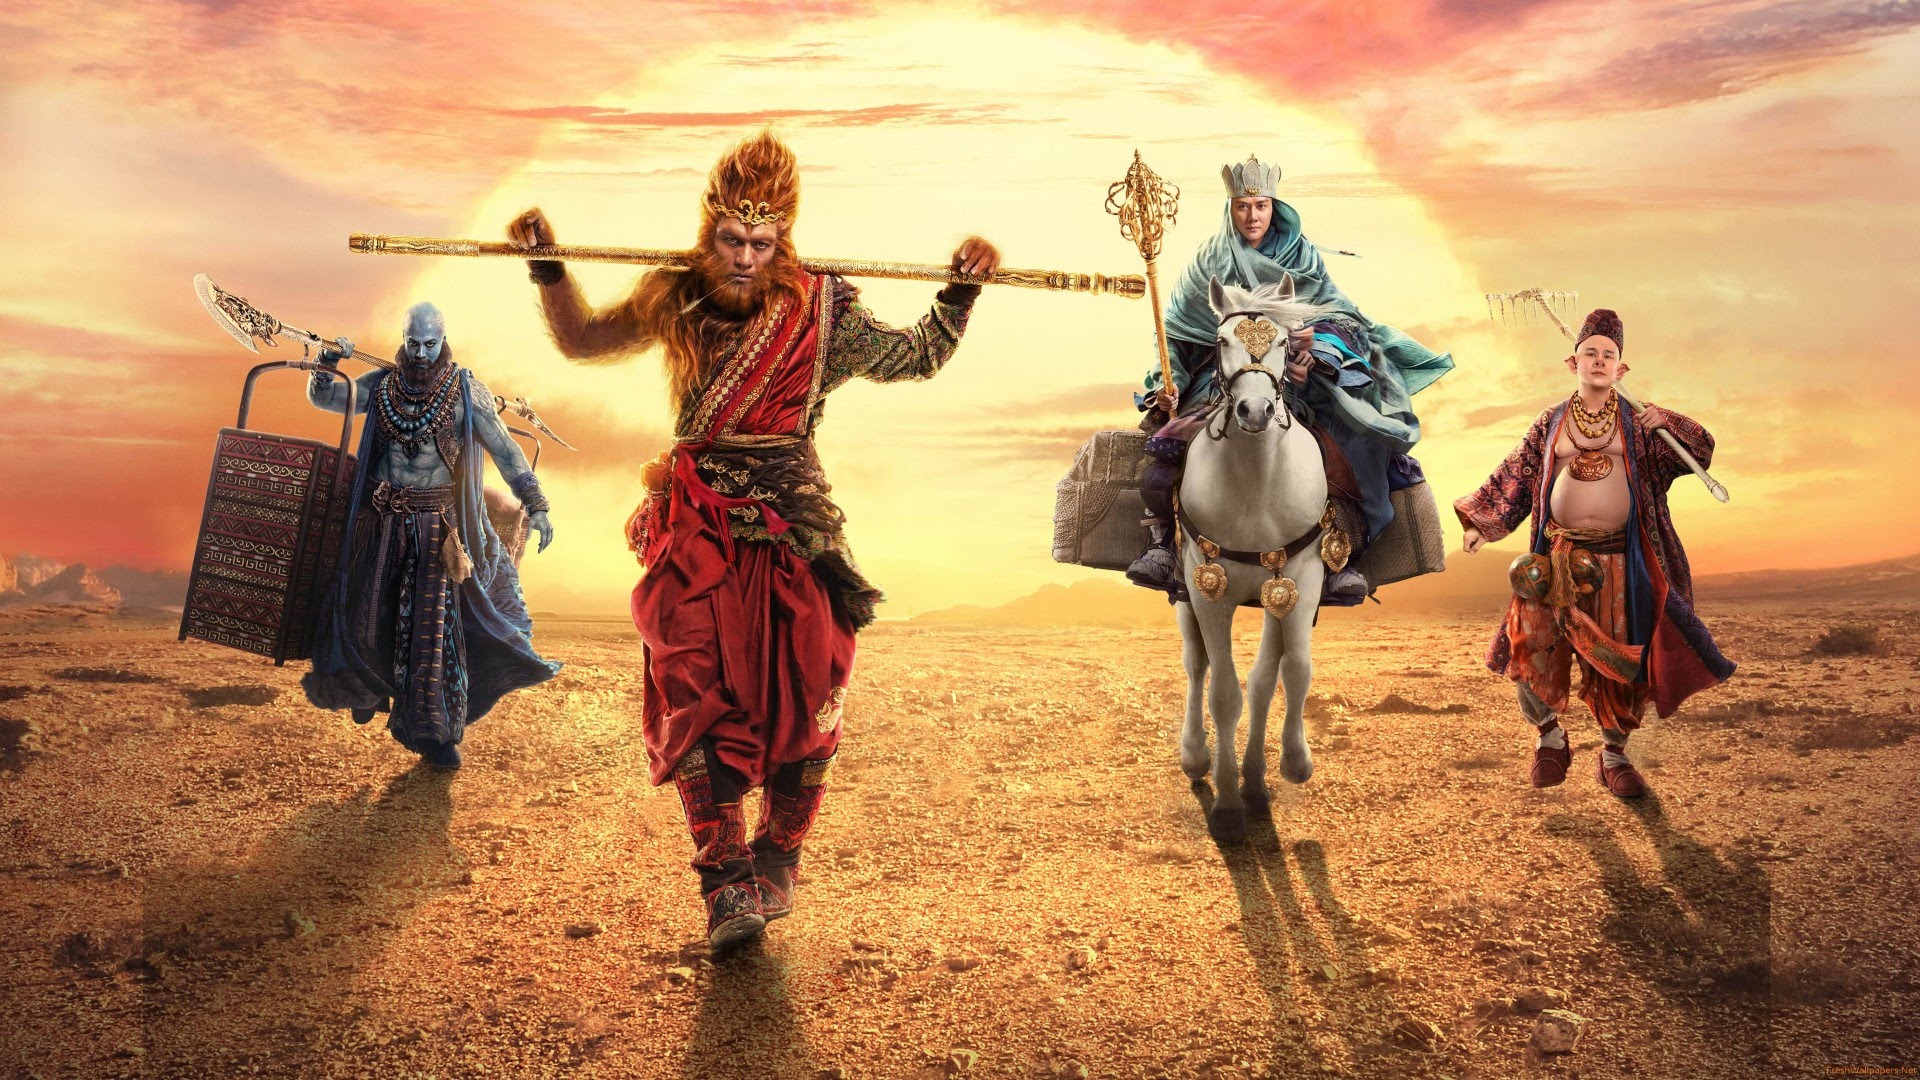 Nice Images Collection: The Monkey King 2 Desktop Wallpapers